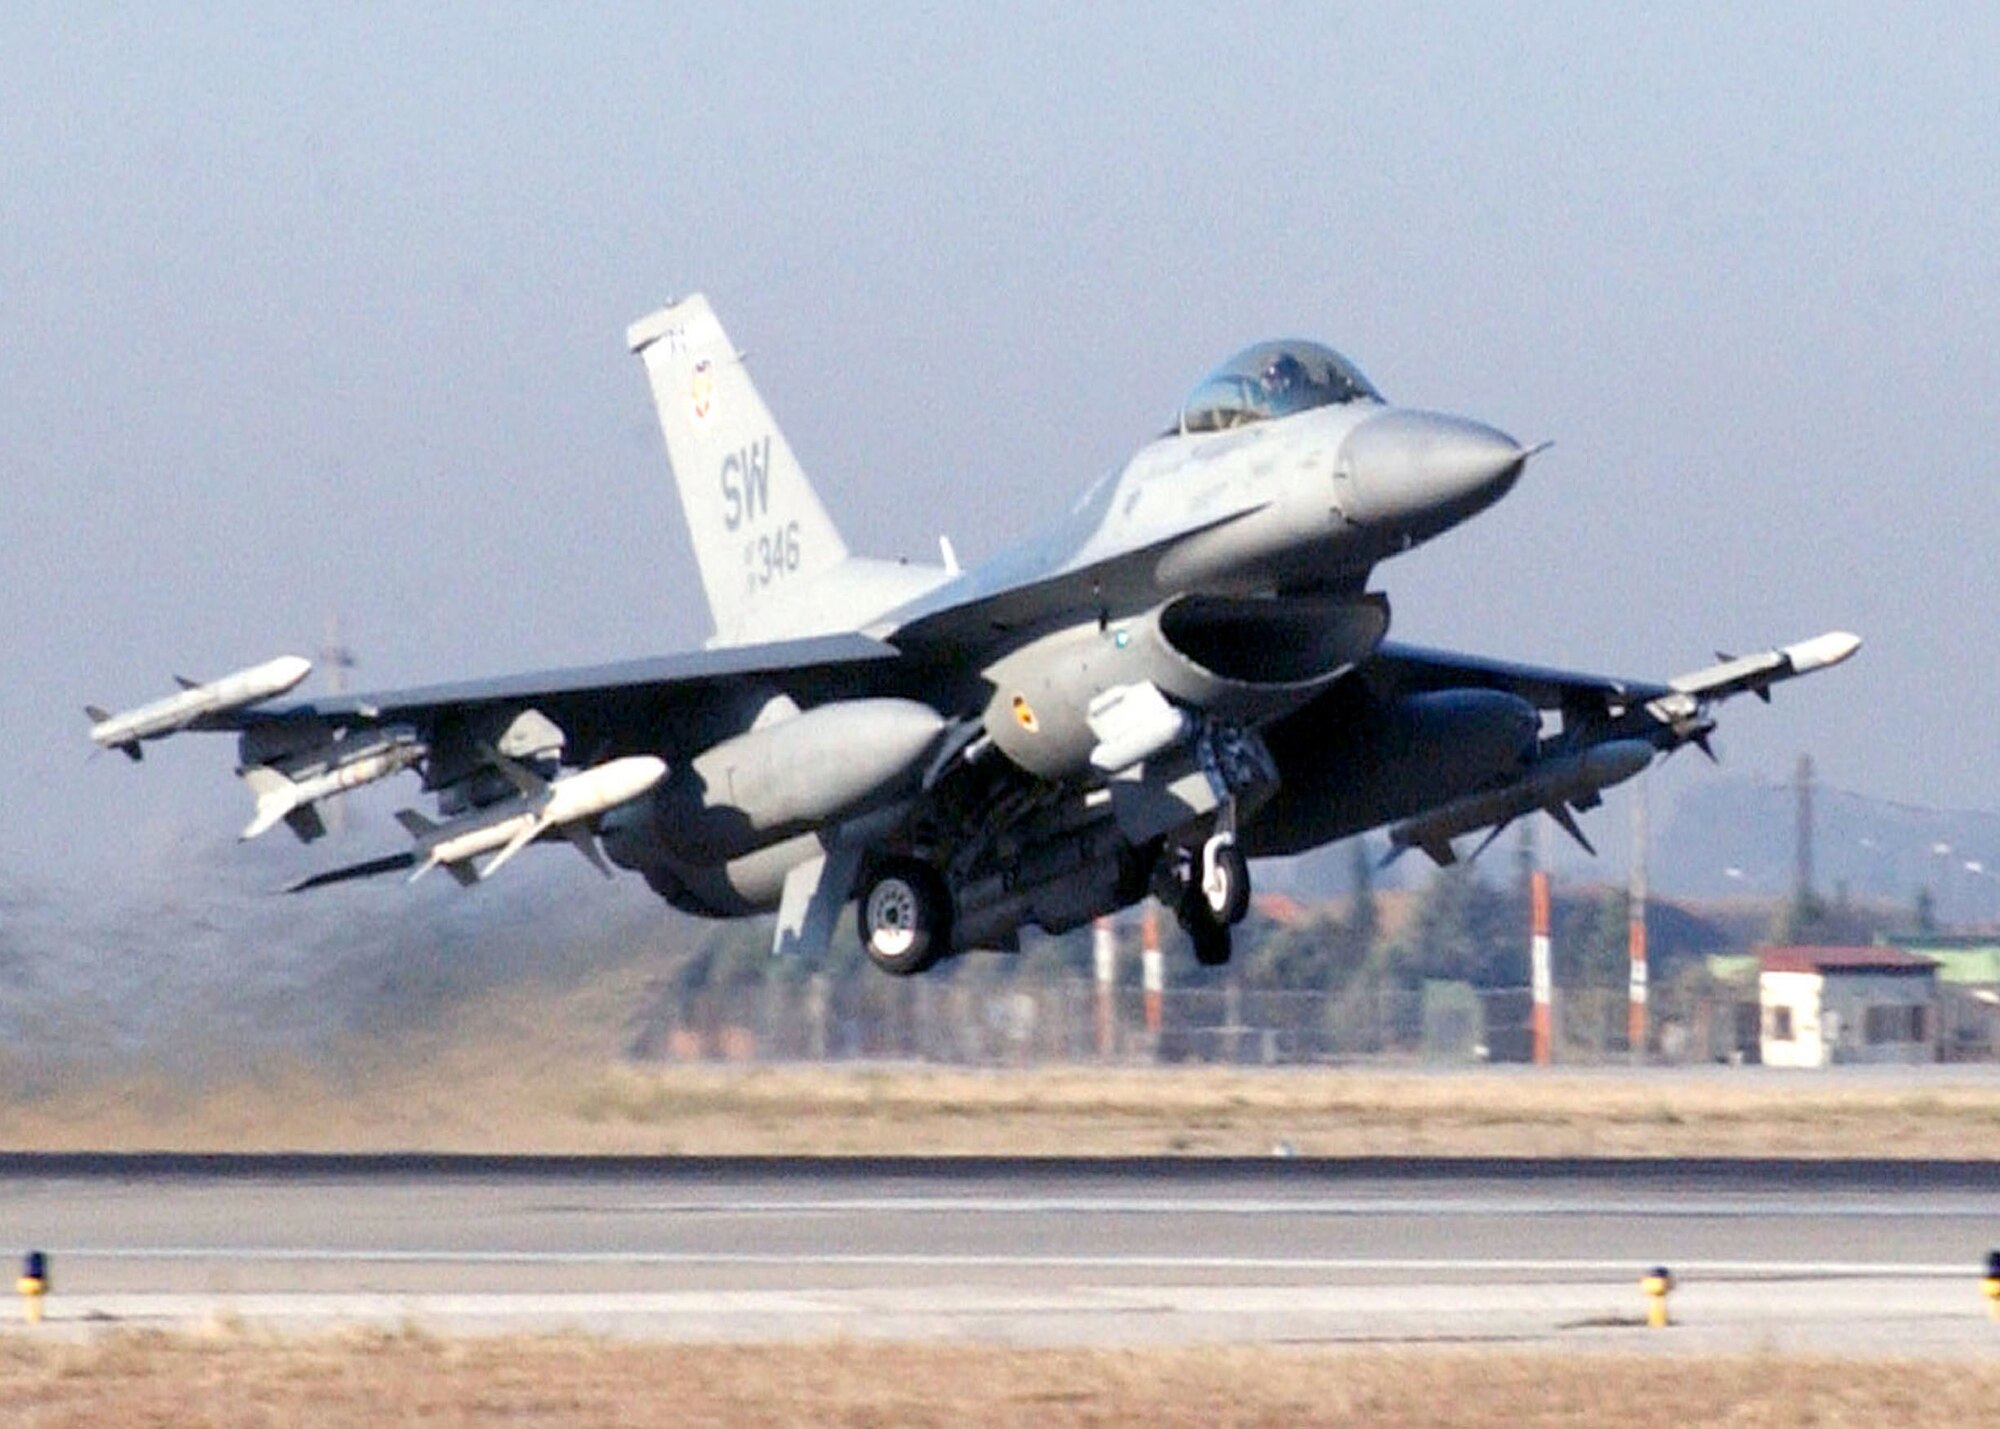 INCIRLIK AIR BASE, Turkey -- An F-16 C/J Fighting Falcon flown by a pilot from Shaw Air Force Base, S.C., takes off during an Operation Northern Watch mission here.  More than 50 United Kingdom and U.S. aircraft are assigned to Operation Northern Watch enforcing the no-fly zone over northern Iraq. (U.S. Air Force photo by Staff Sgt. Jason Gamble)